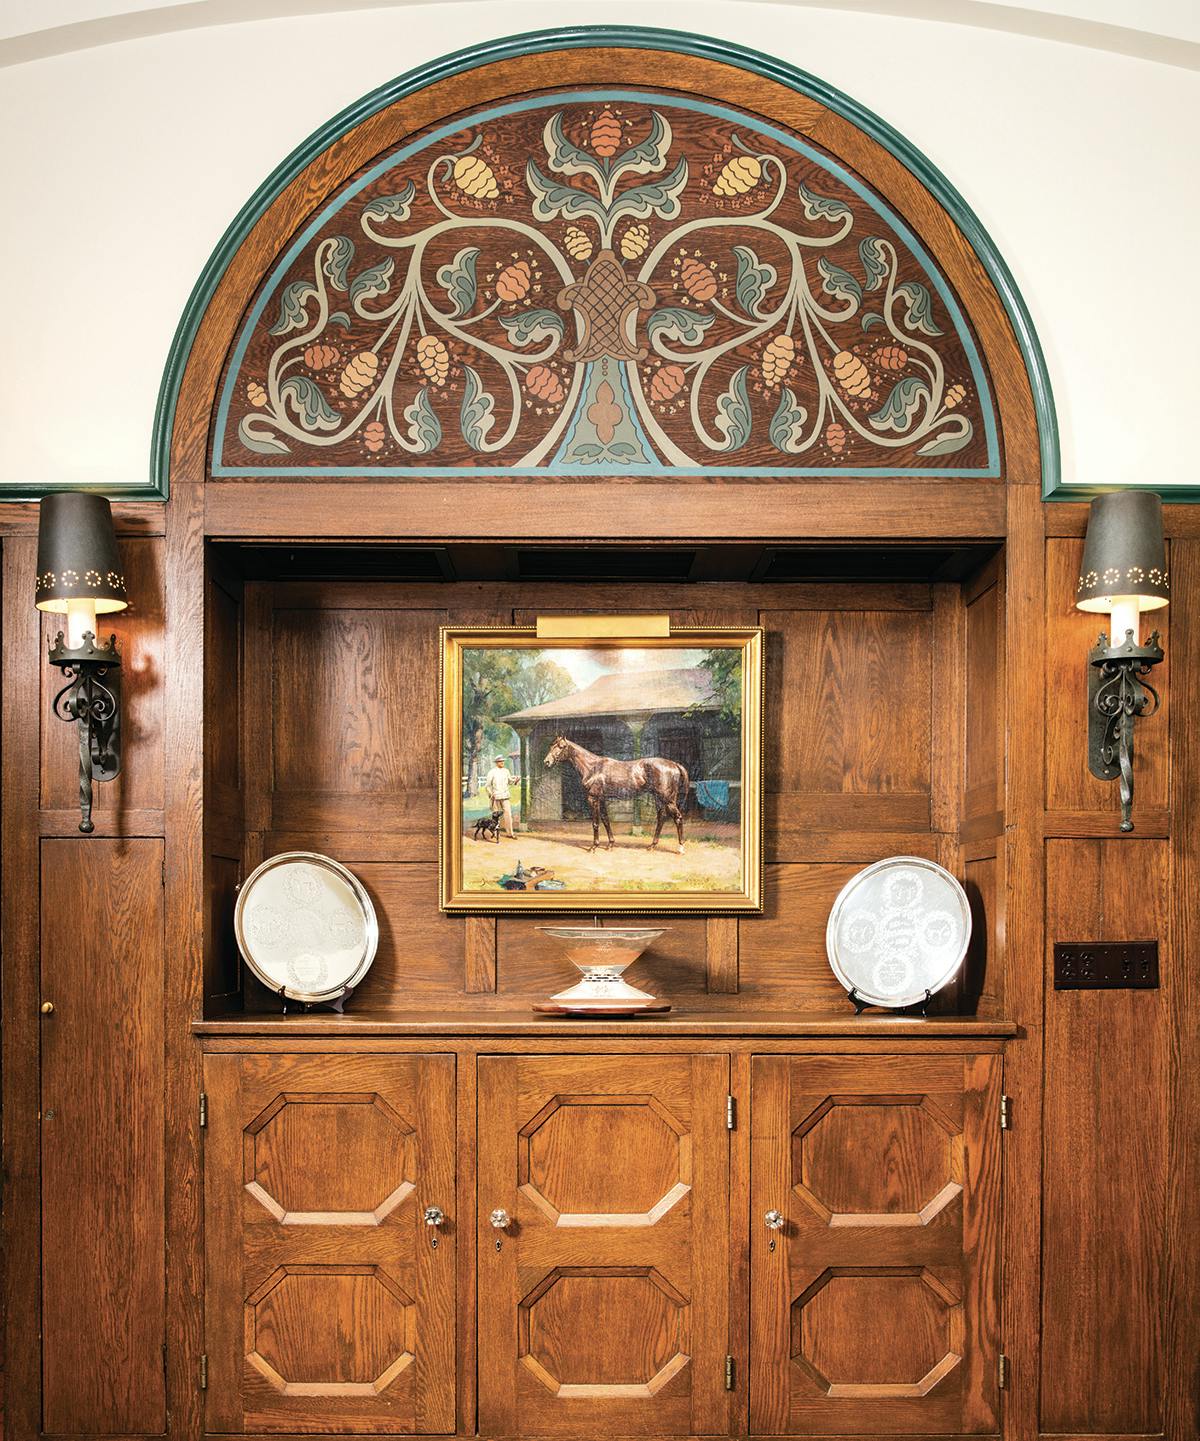 A Tiffany-designed China cabinet in the dining room now serves as a display case for the Belmont Stakes trophies won by King Ranch Thoroughbreds and for the Triple Crown trophy won by Assault.